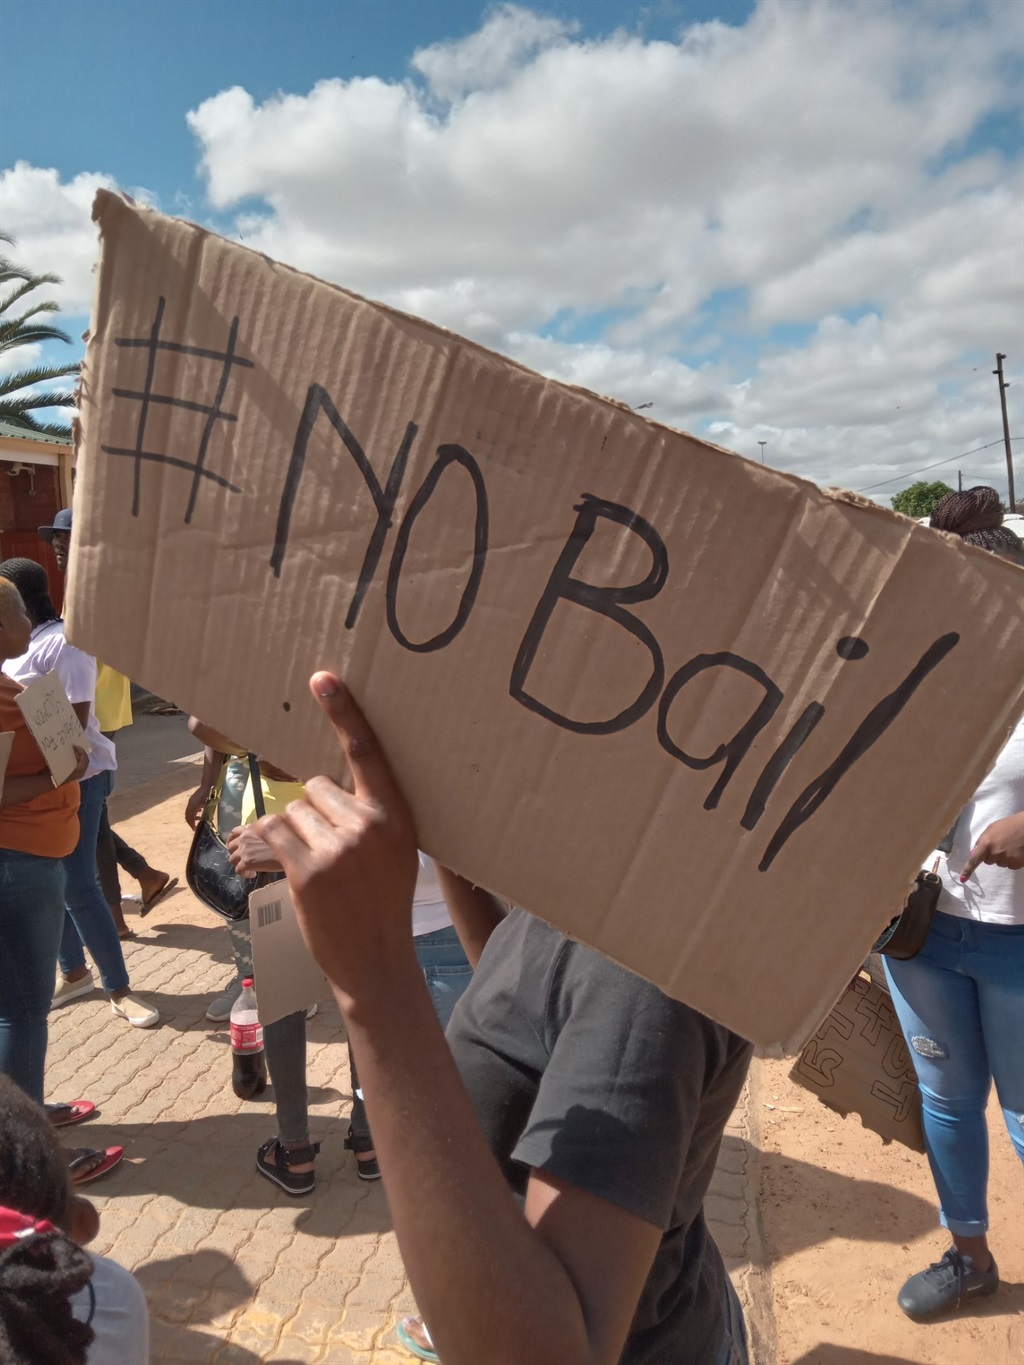 Residents of Dertig in Hammanskraal demonstrated outside the court, saying they want Moretele Magistrates Court to deny all suspects bail. Photo by Thokozile Mnguni